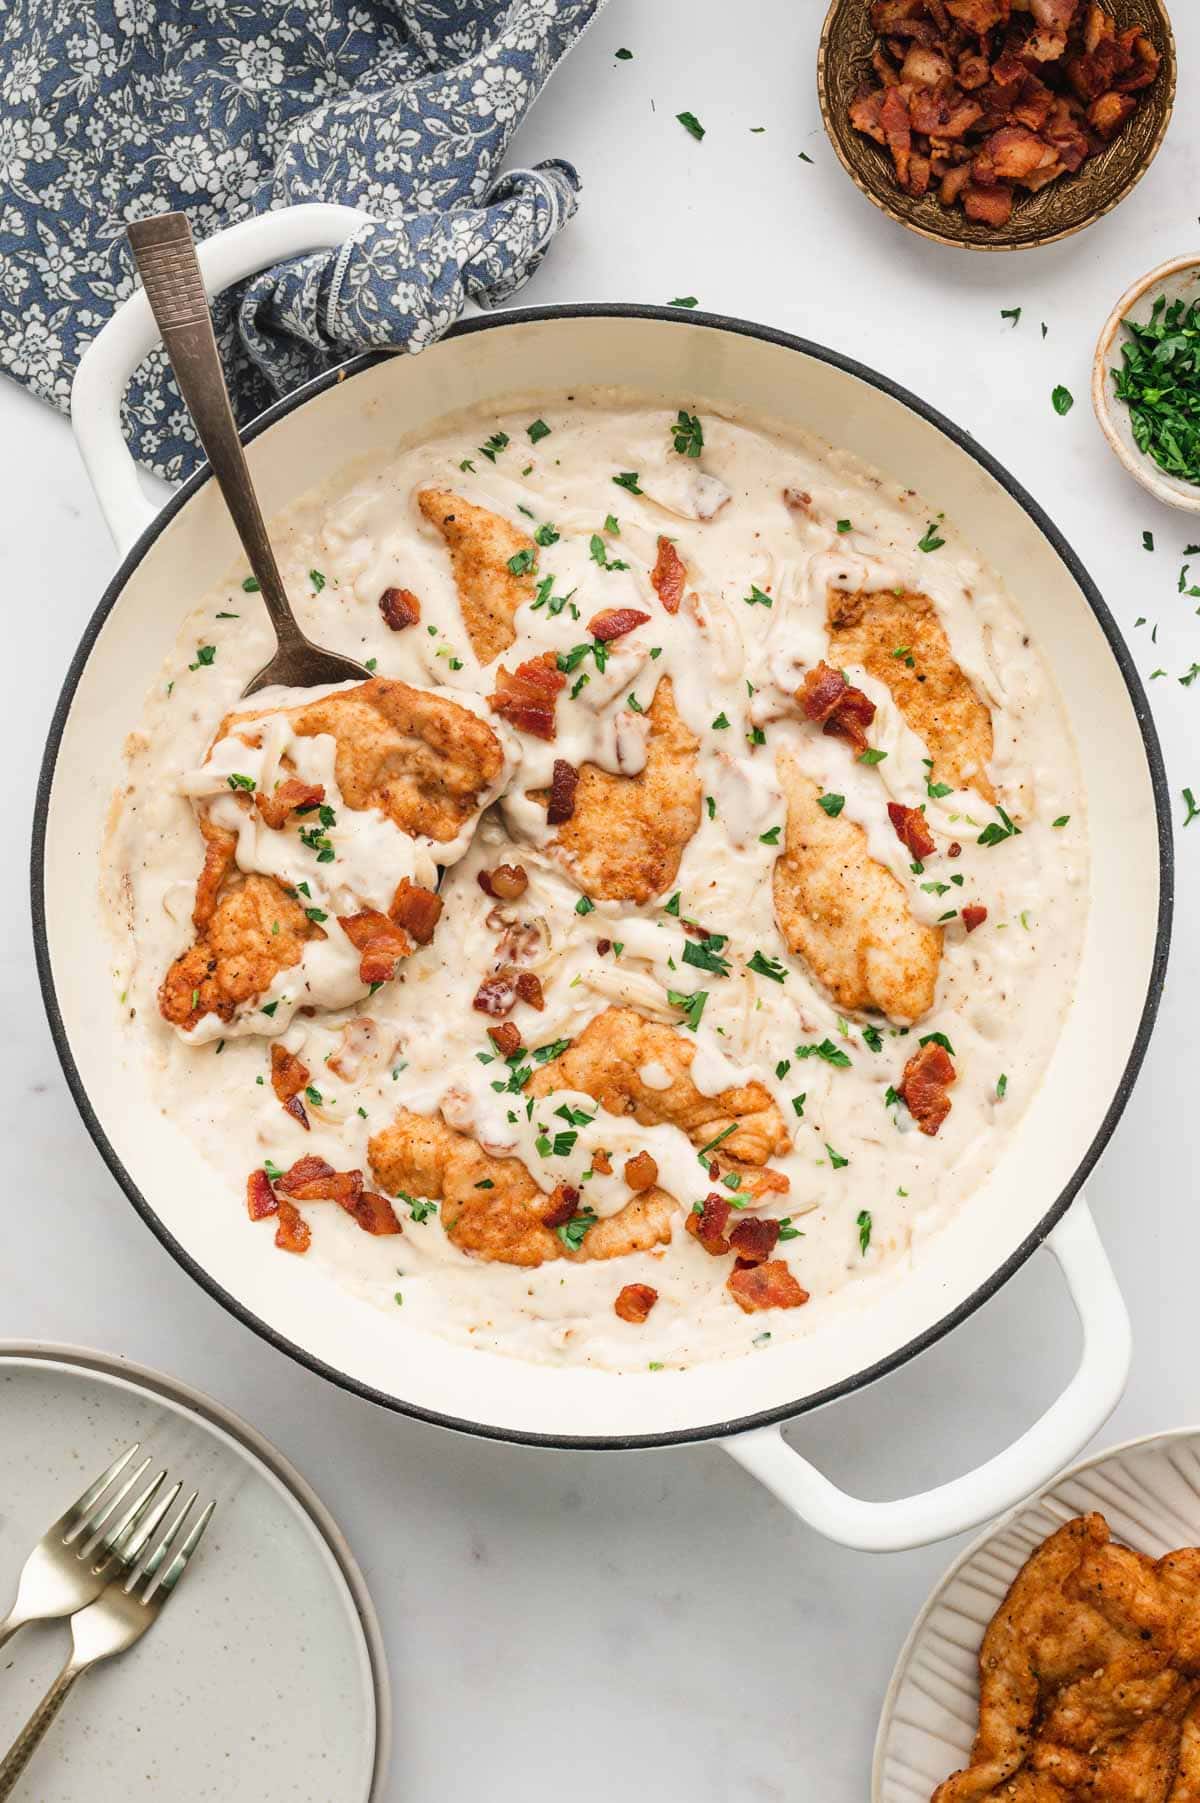 Chicken cutlets, fried and then smothered in a skillet of gravy.